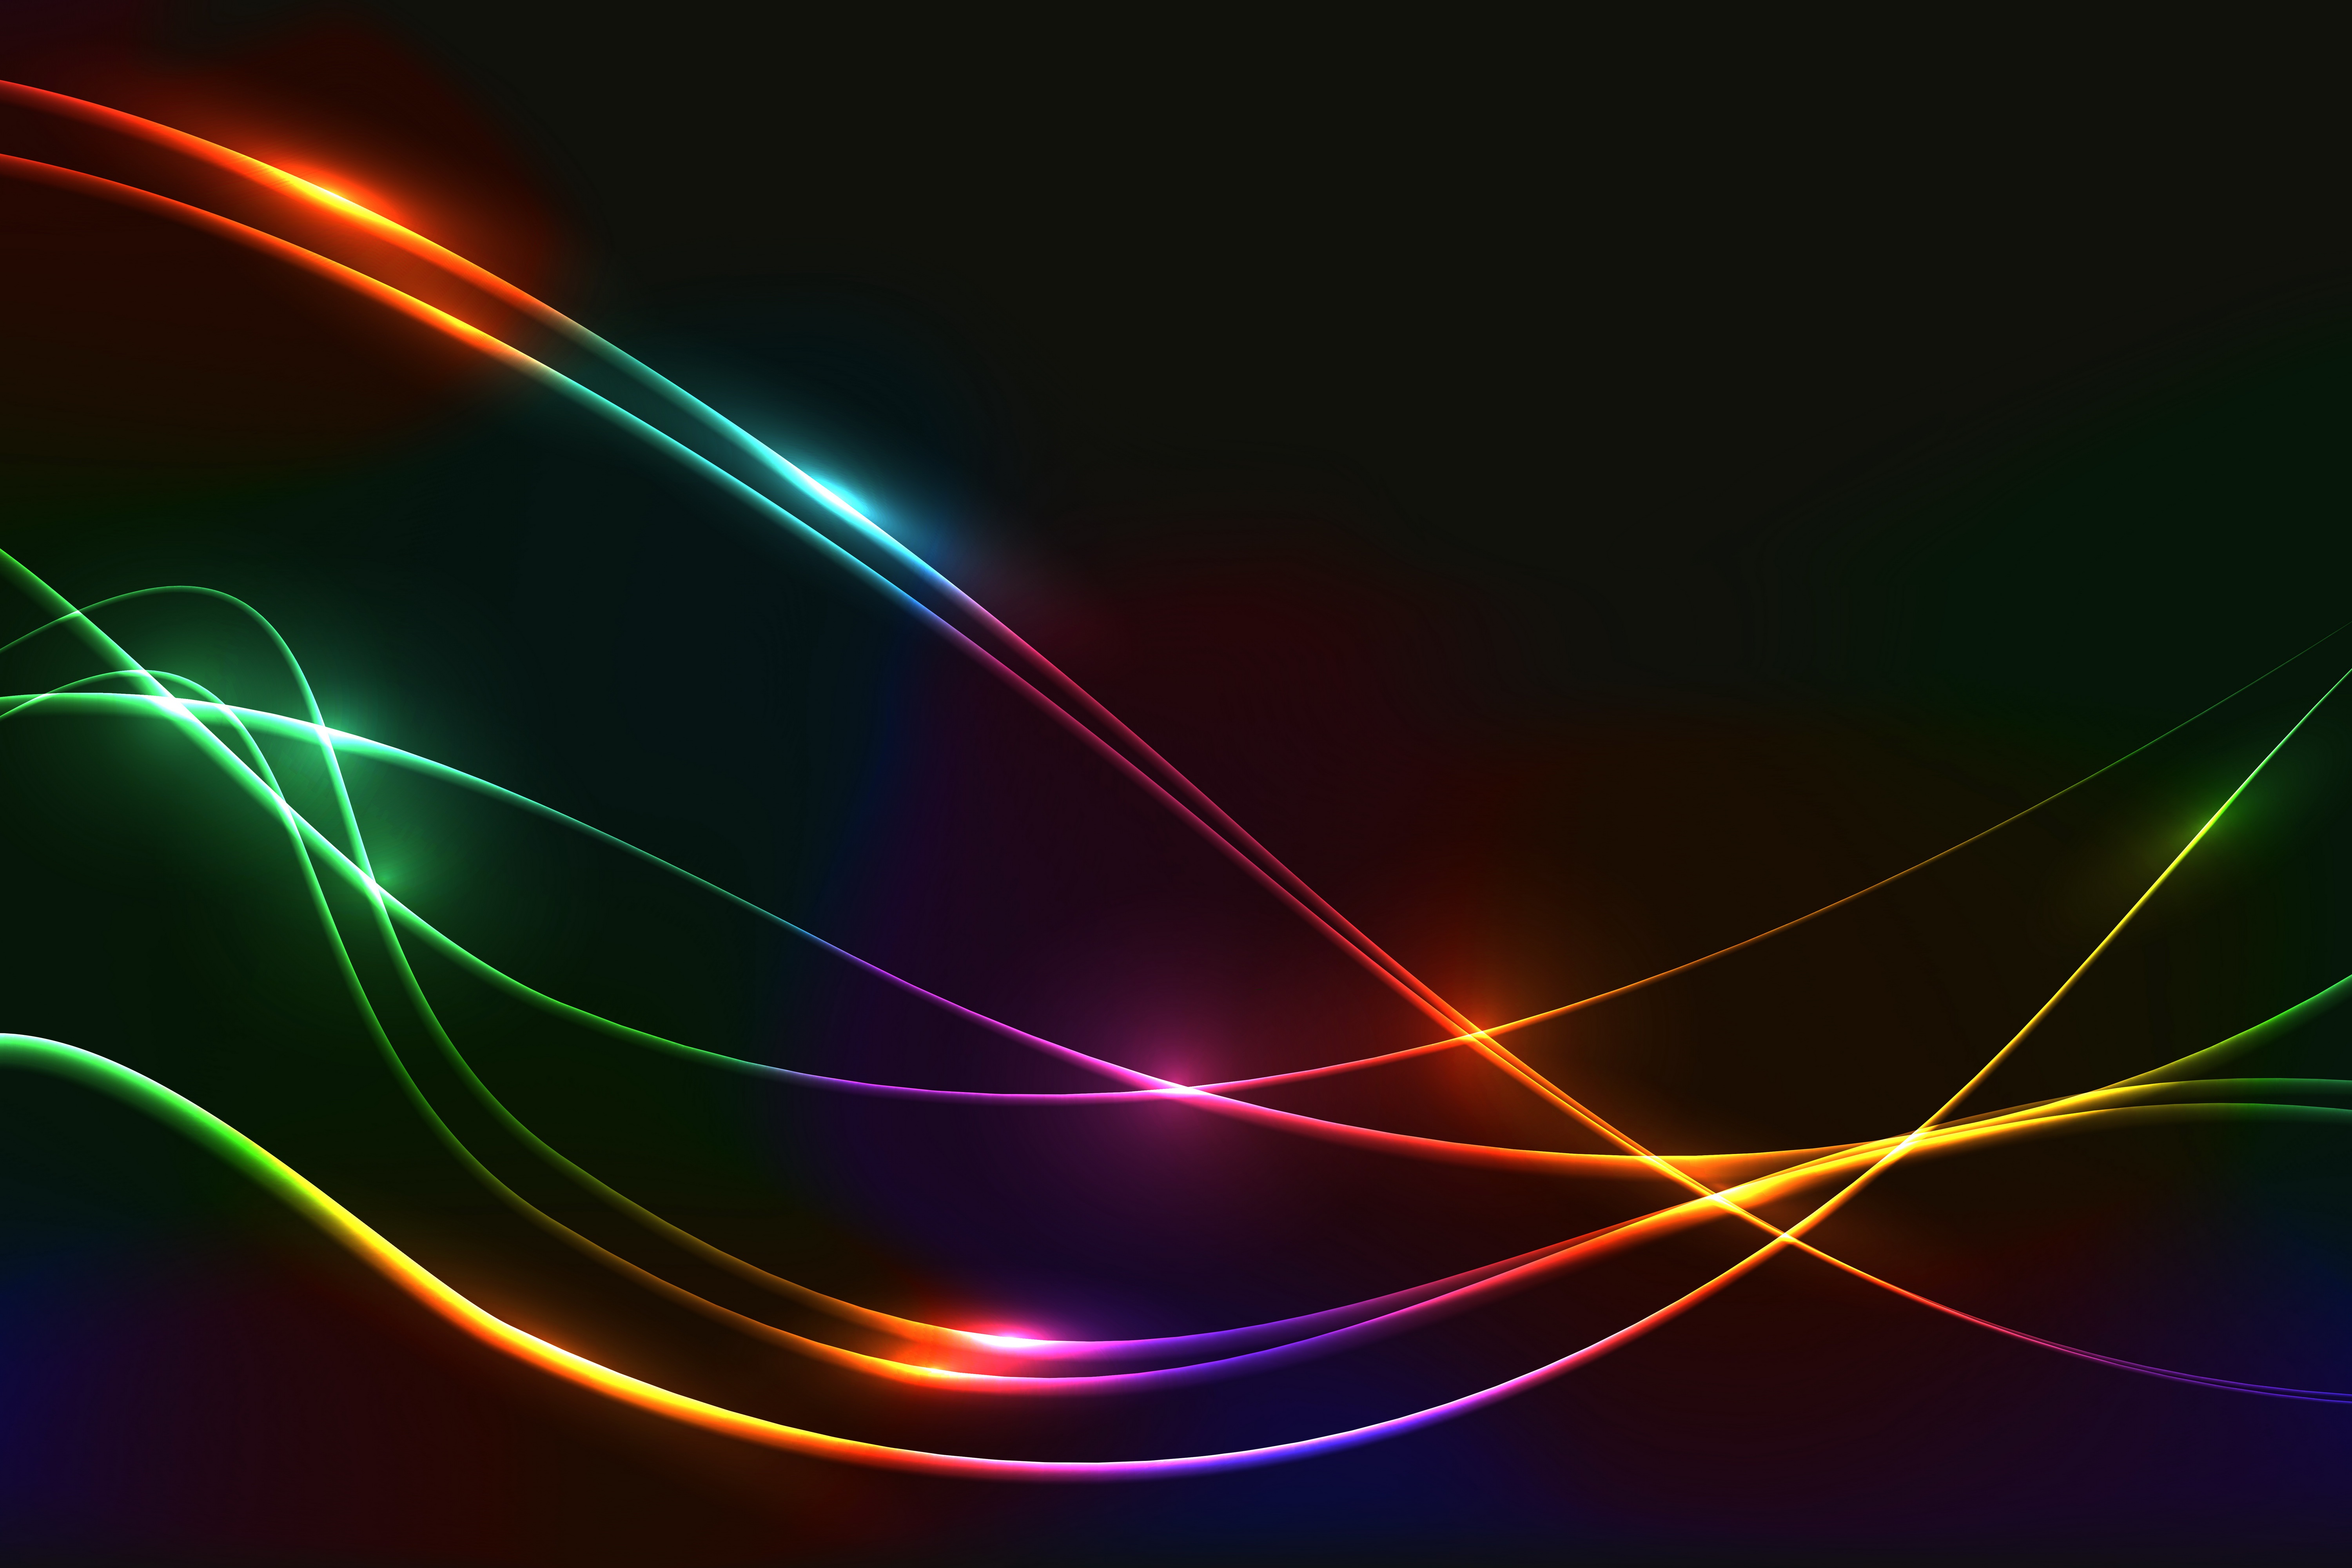 Abstract Light  4k Ultra HD Wallpaper Background  Image 